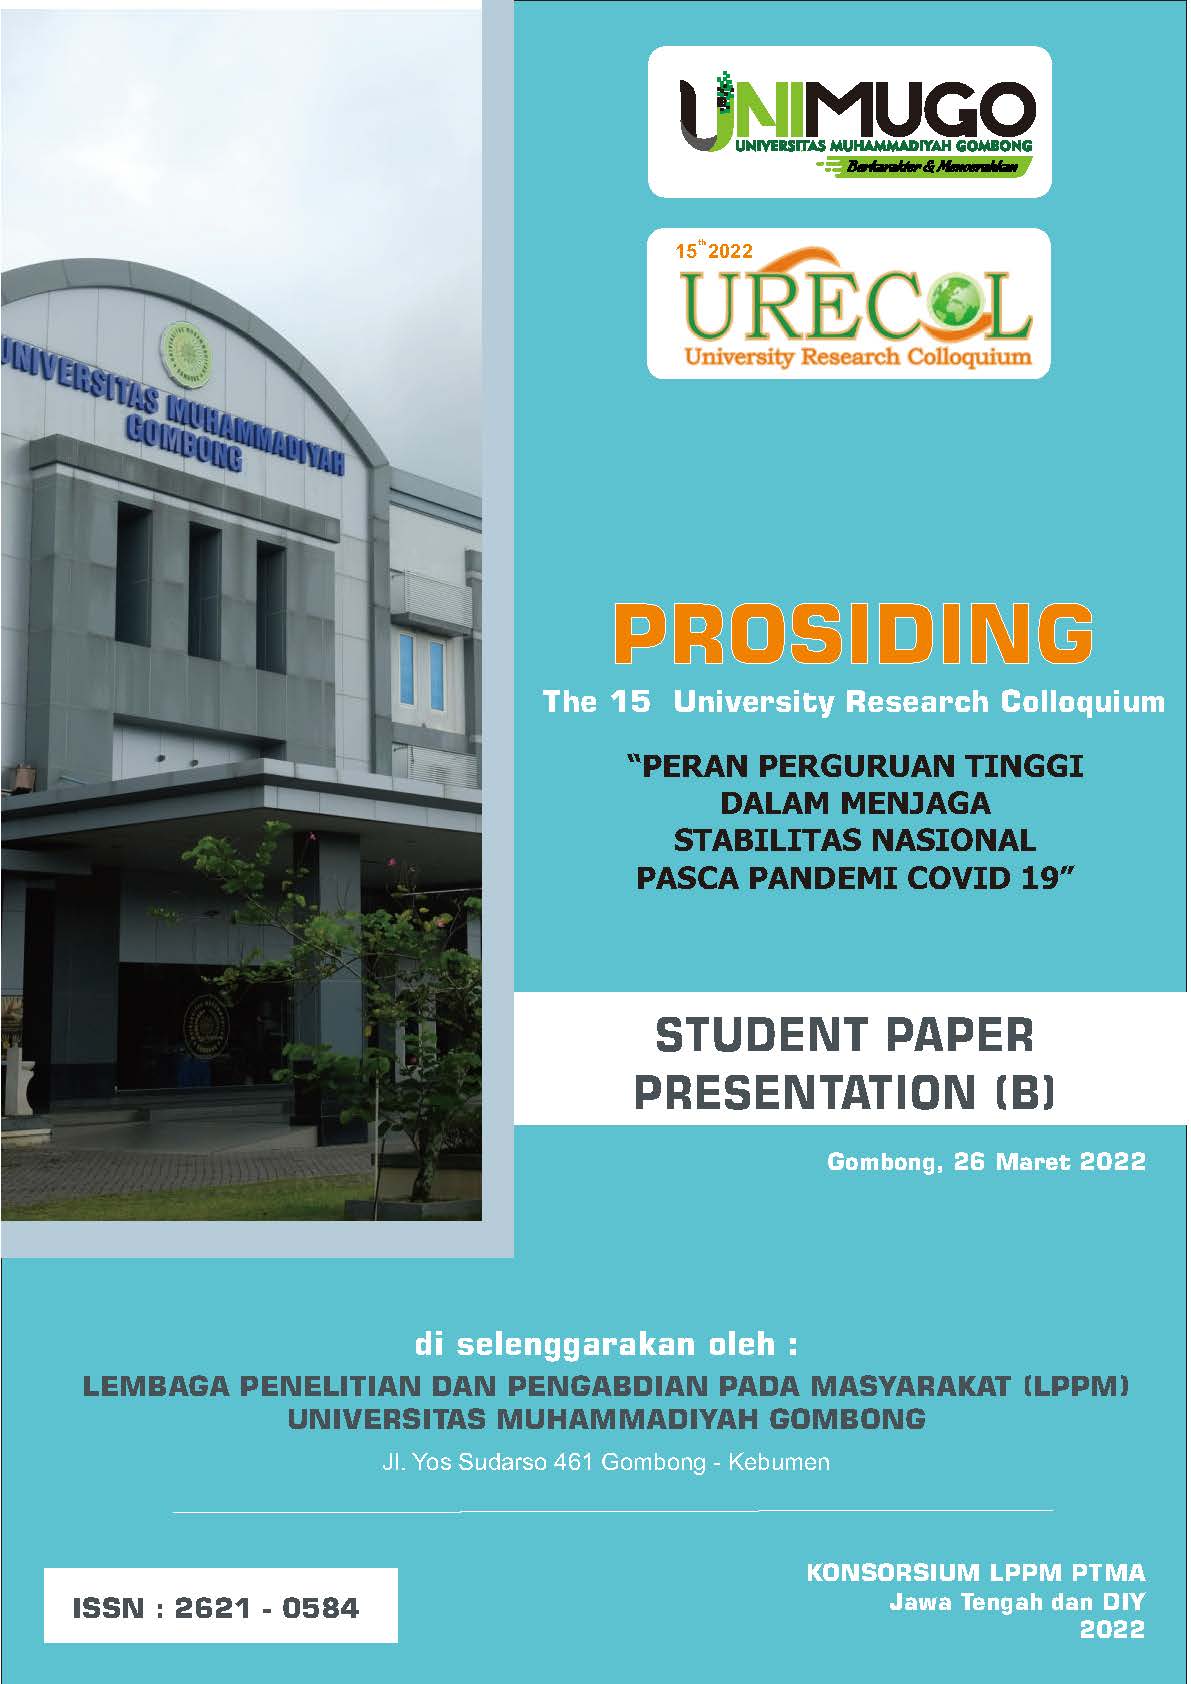 					View Proceeding of The 15th University Research Colloquium 2022: Mahasiswa (Student Paper Presentation) B
				